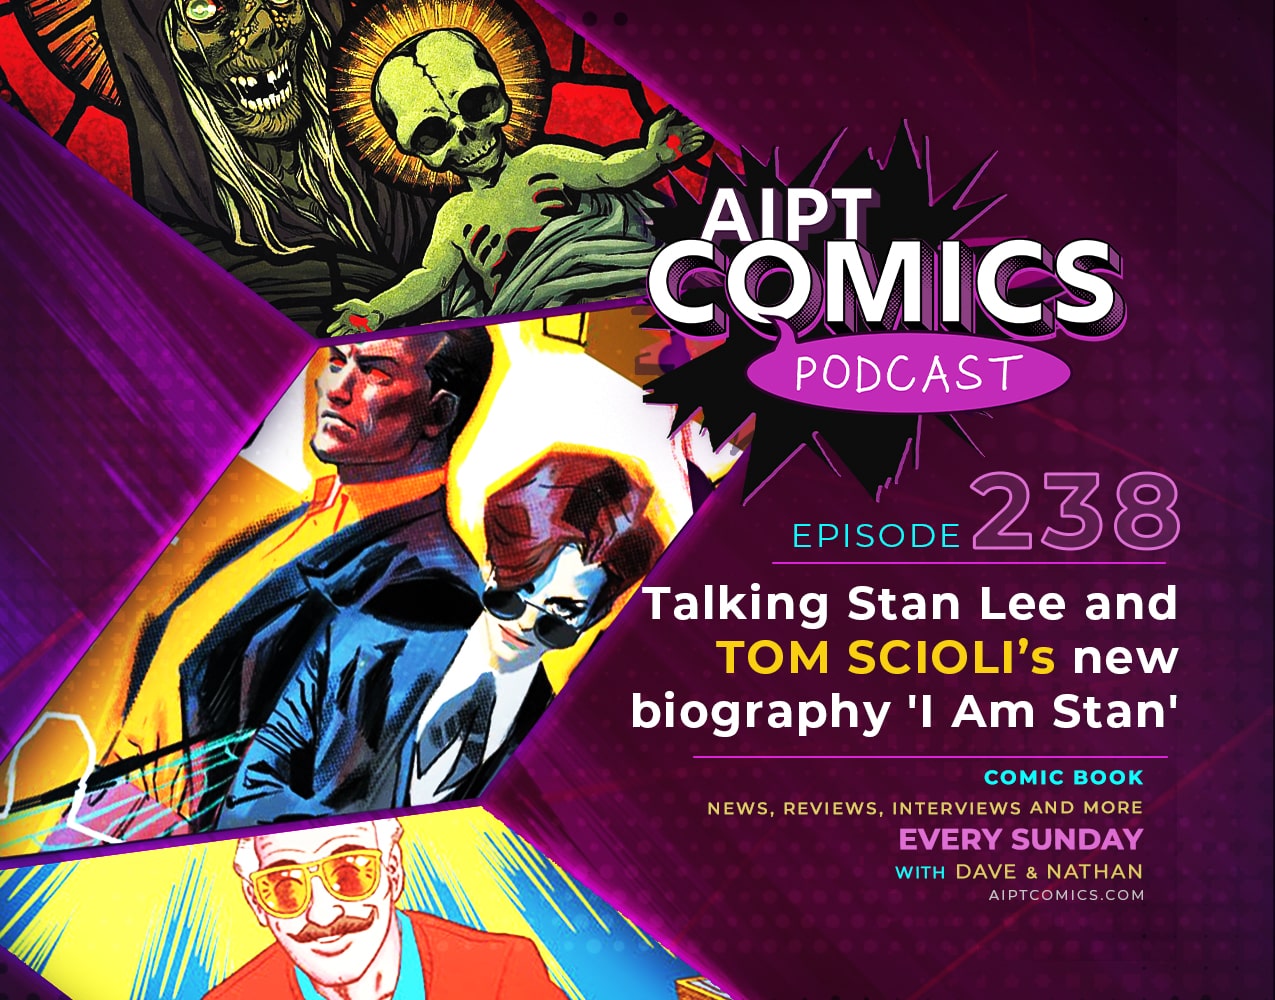 AIPT Comics Podcast episode 238: Talking Stan Lee and Tom Scioli's new biography 'I Am Stan'